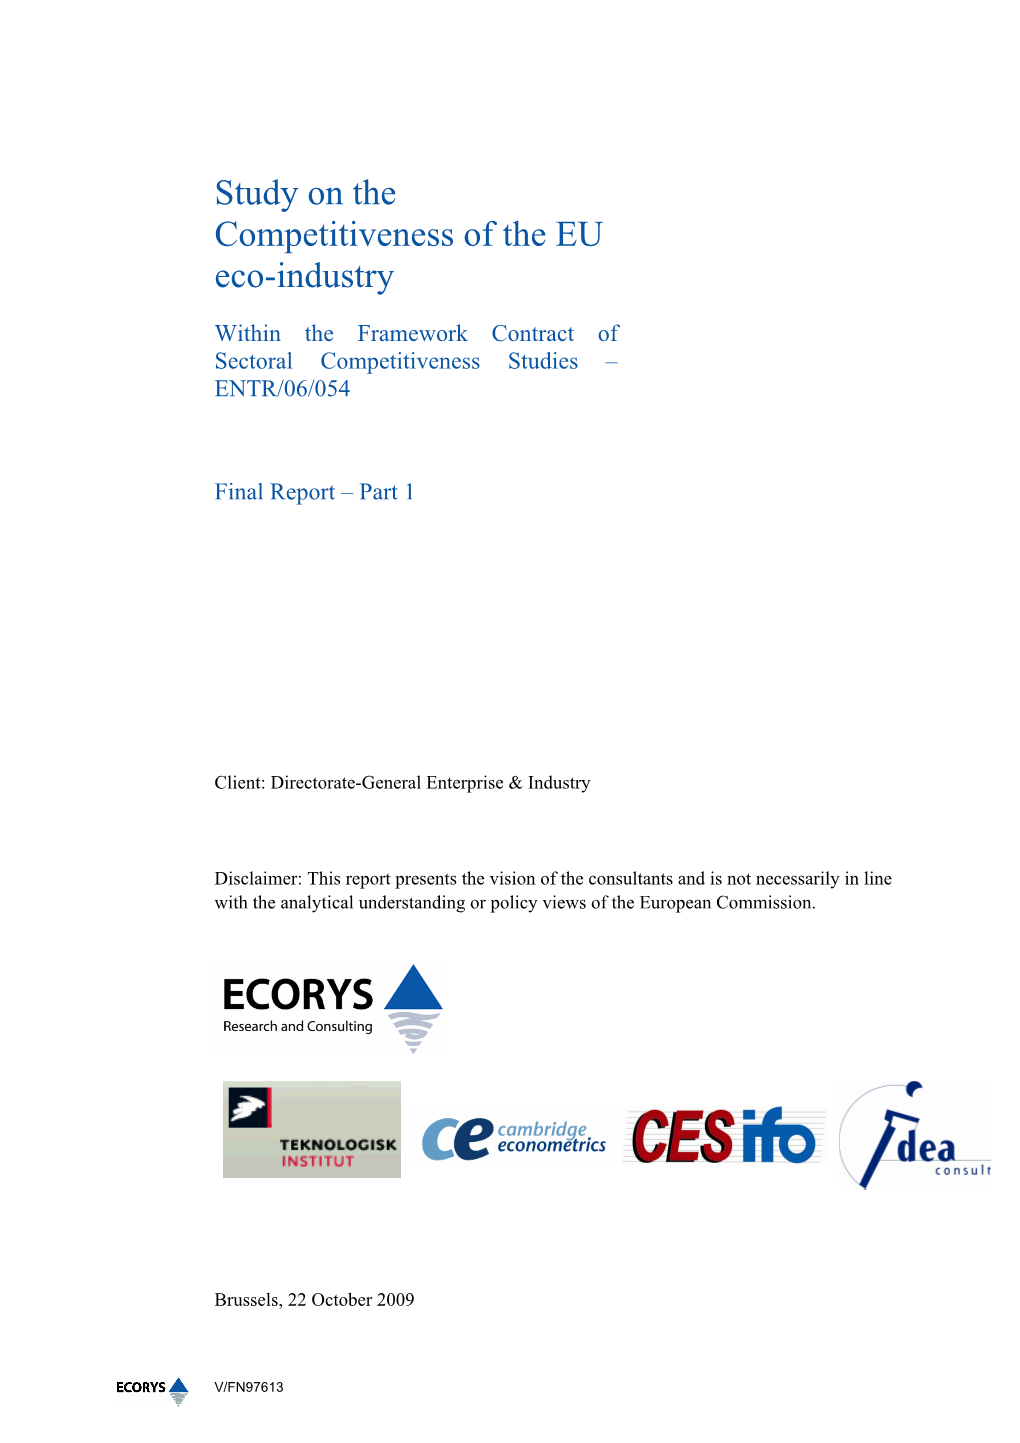 Study on the Competitiveness of the EU Eco-Industry